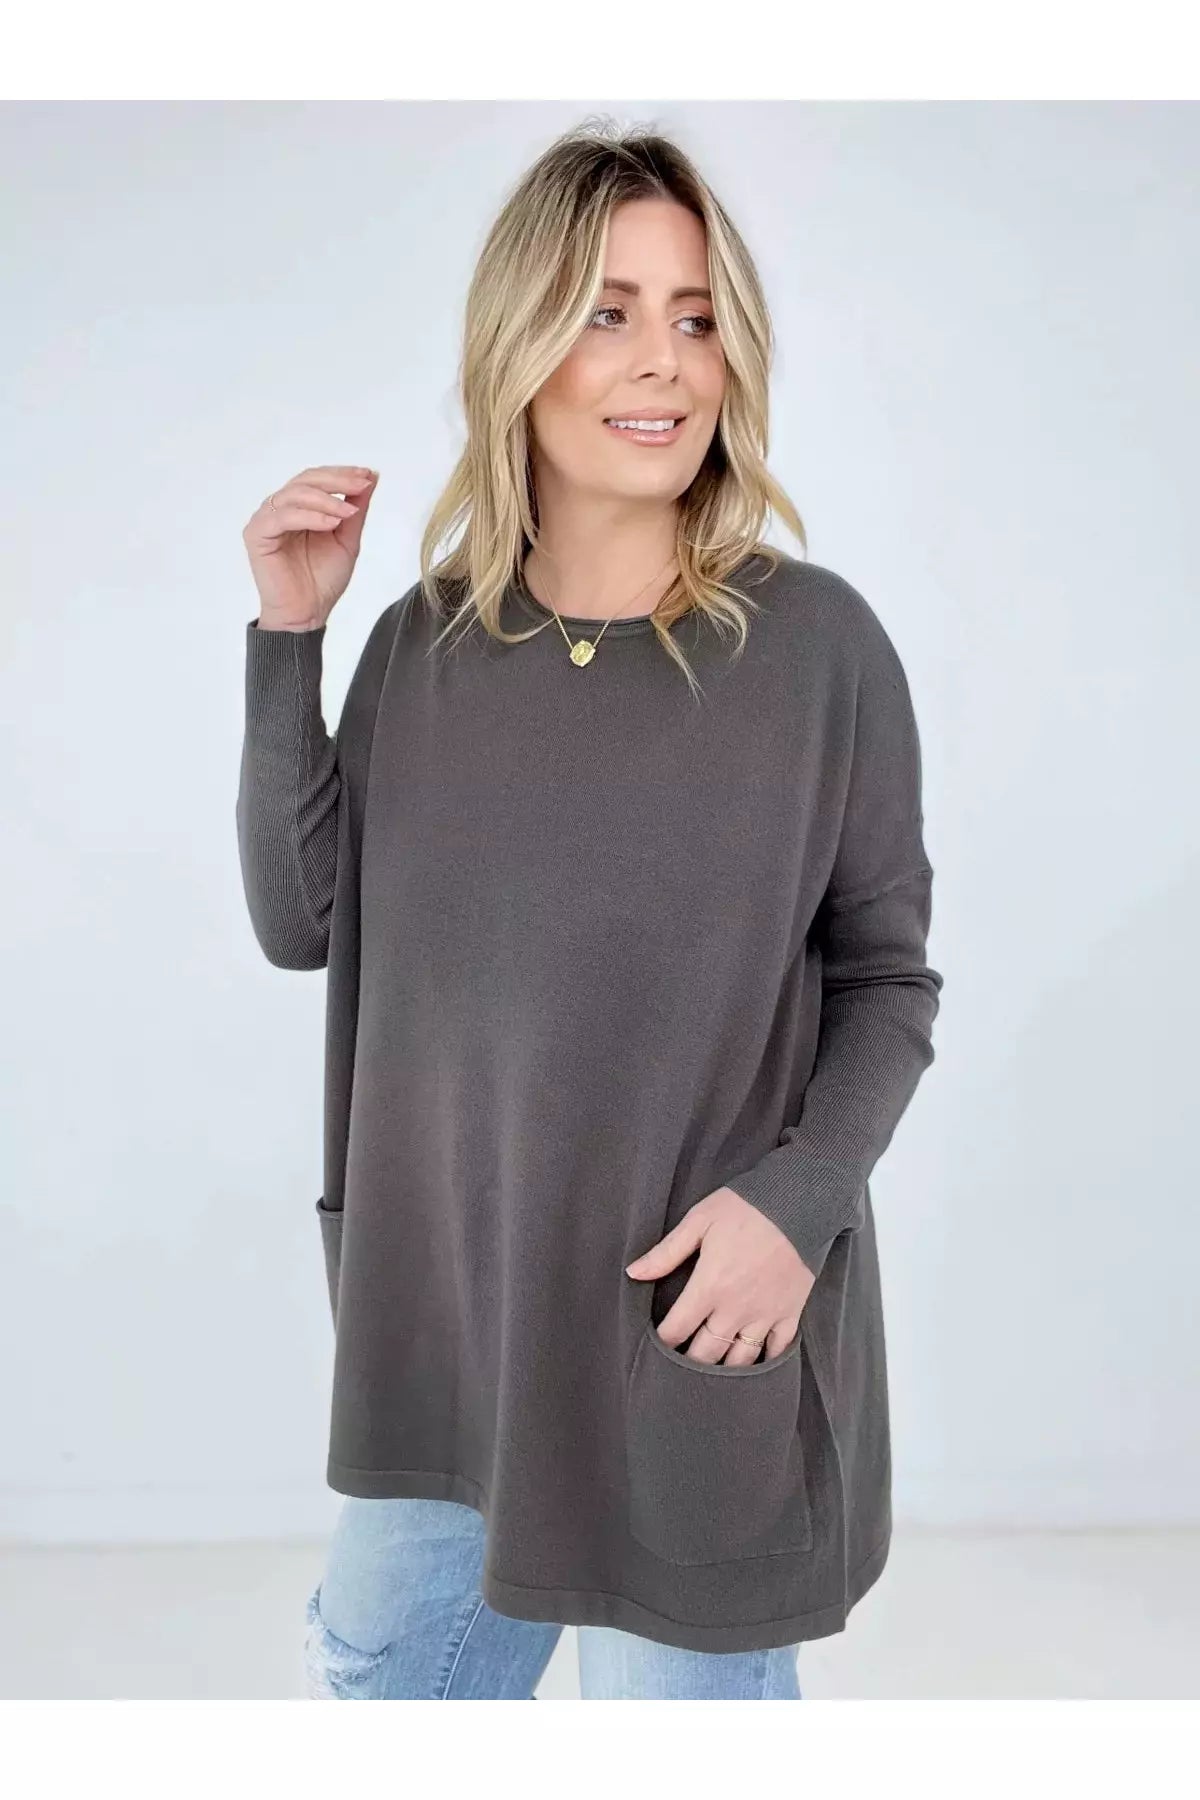 Zenana "Claire" Solid Oversized Front Pocket Sweater